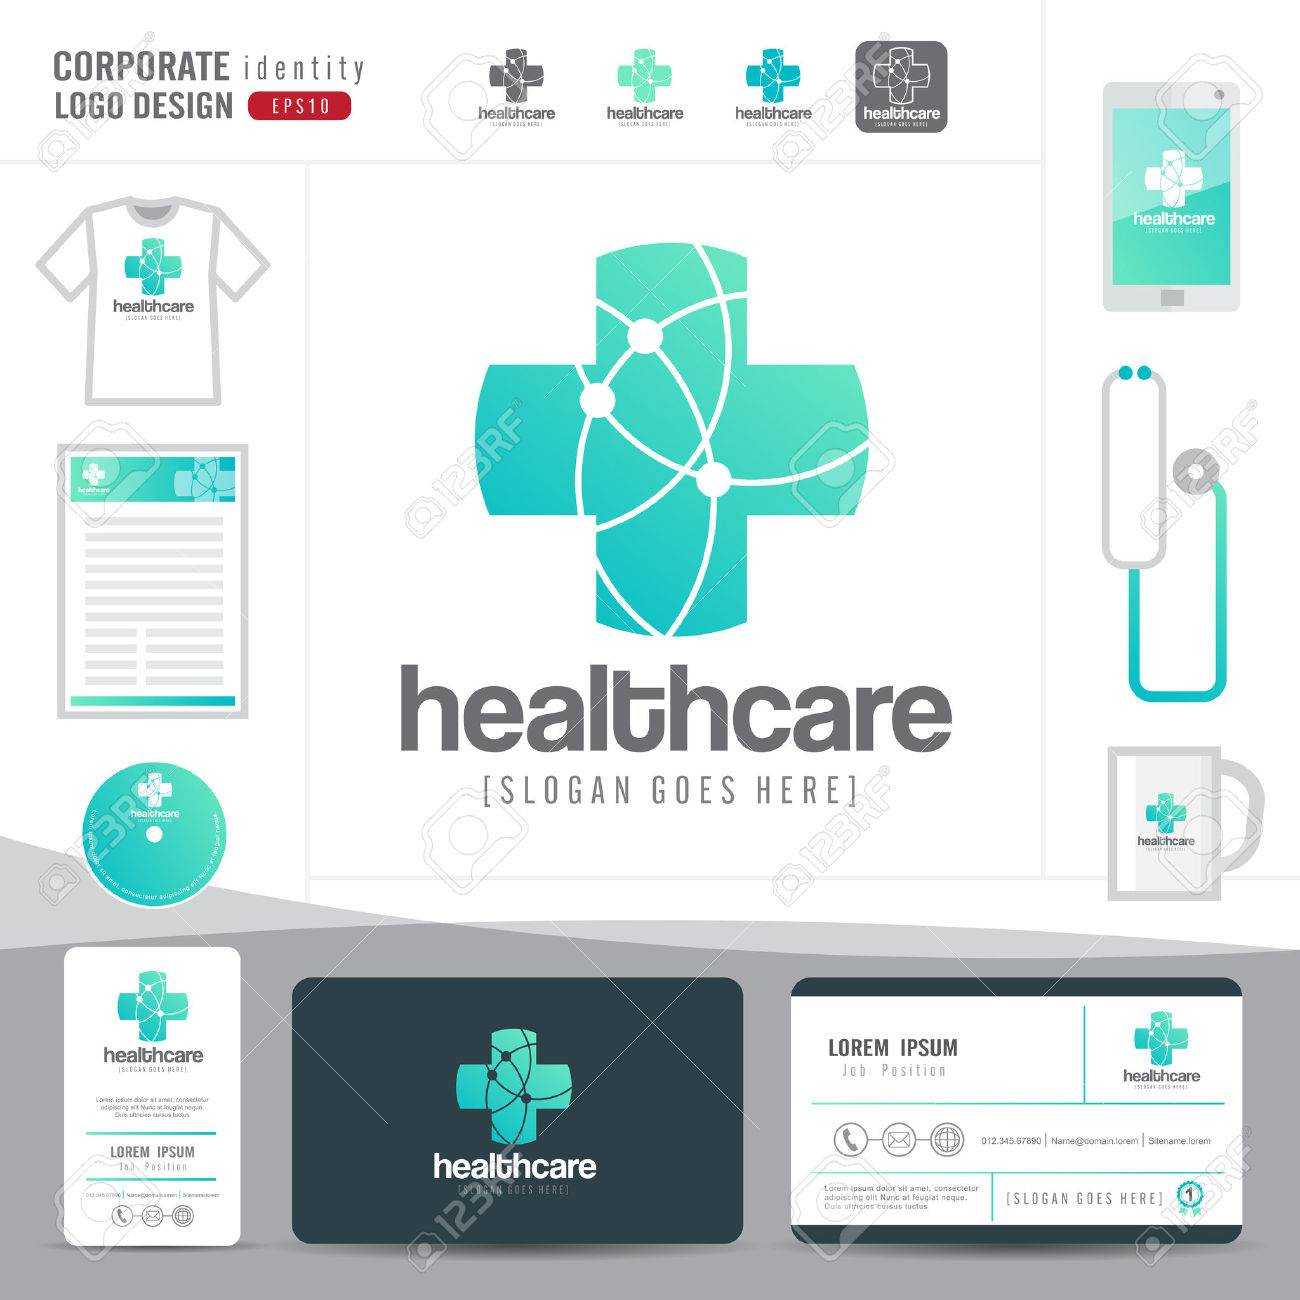 Logo Design Medical Healthcare Or Hospital And Business Card.. Intended For Hospital Id Card Template